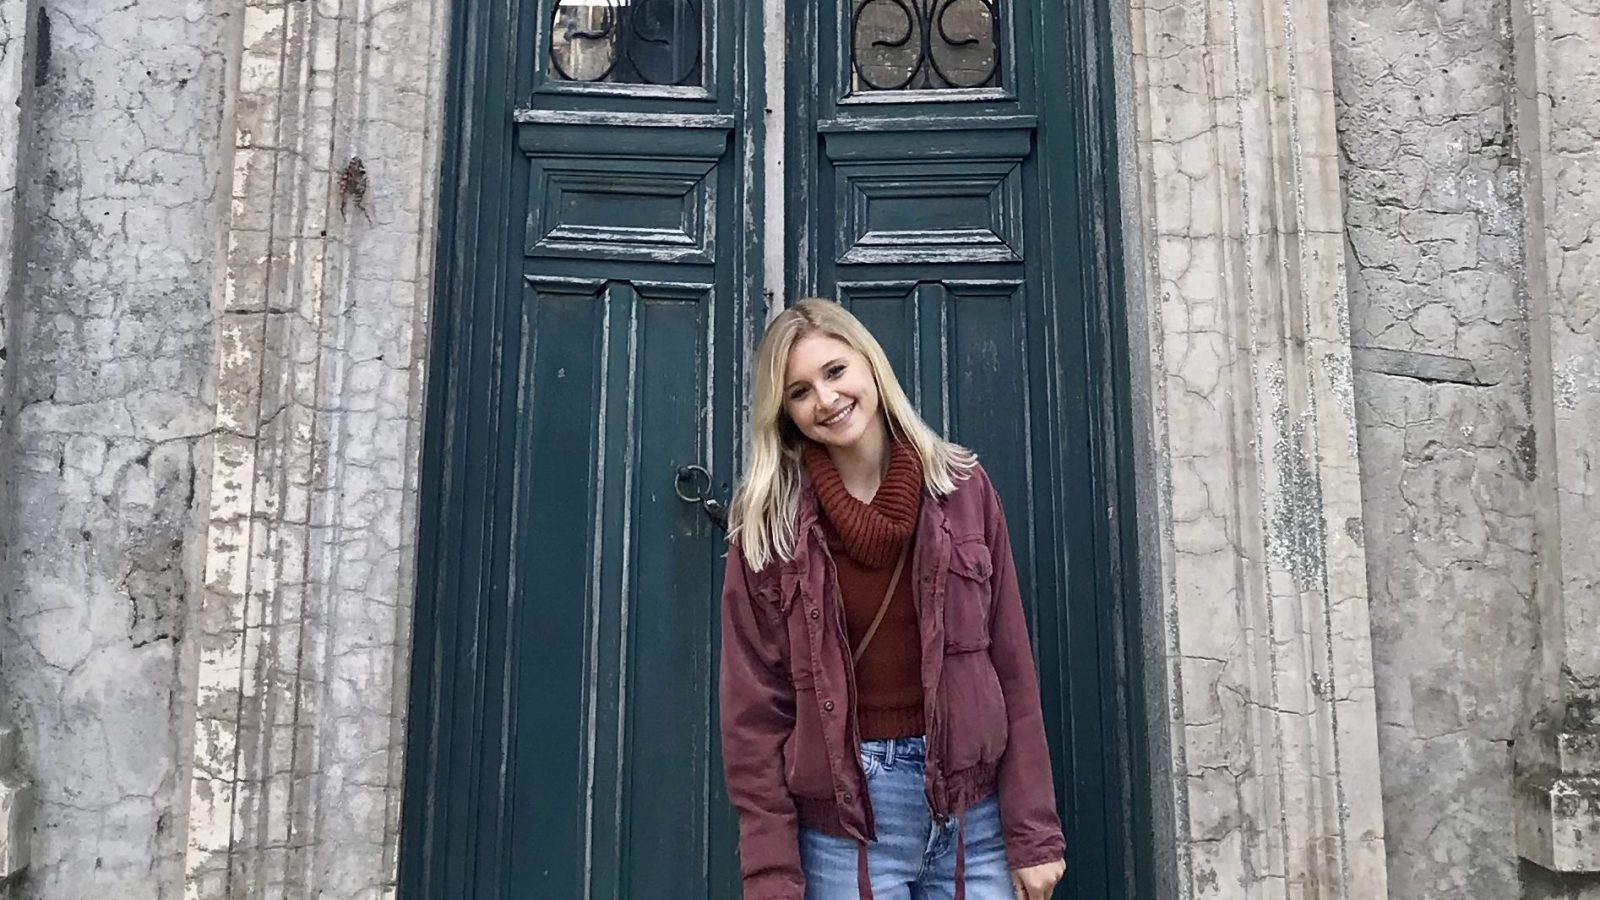 Grace Keegan stands in front of an old door on a stone building